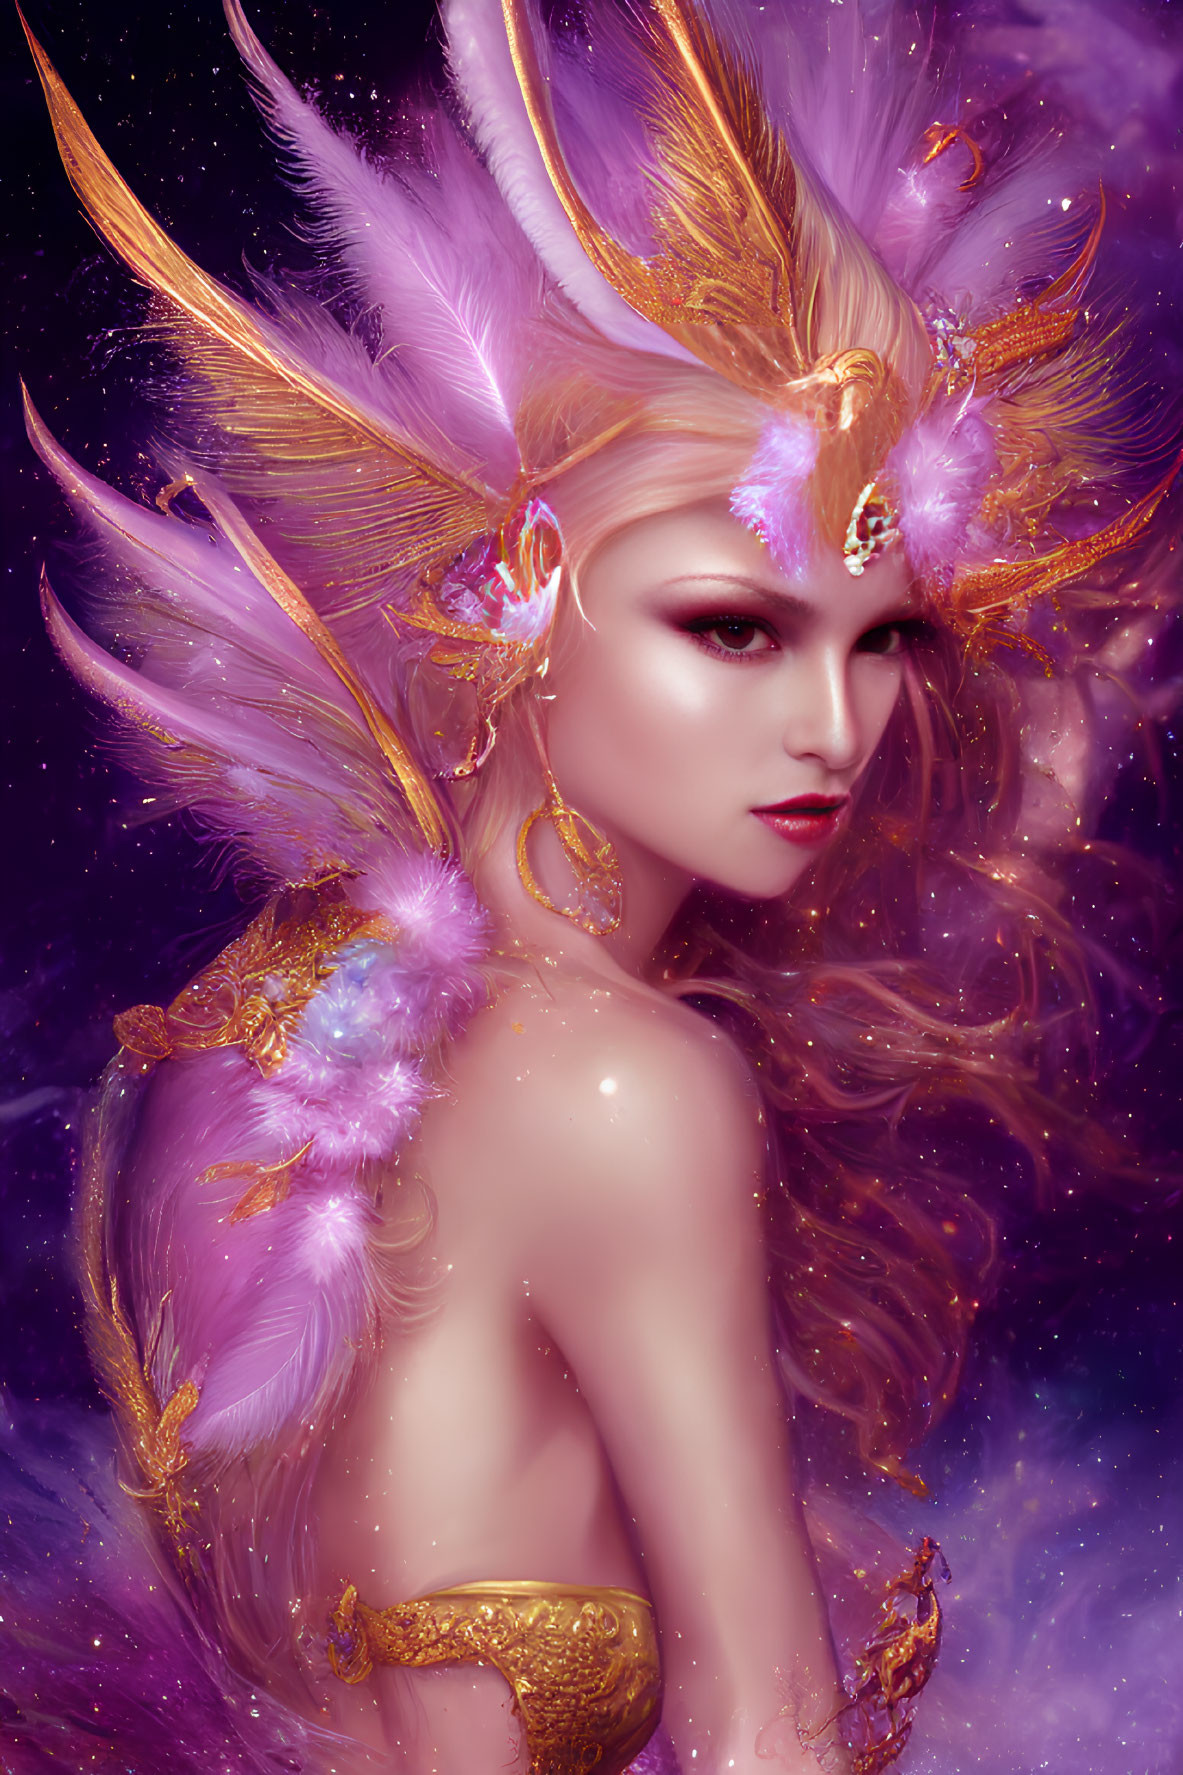 Golden headdress and feathers on ethereal being in starry backdrop